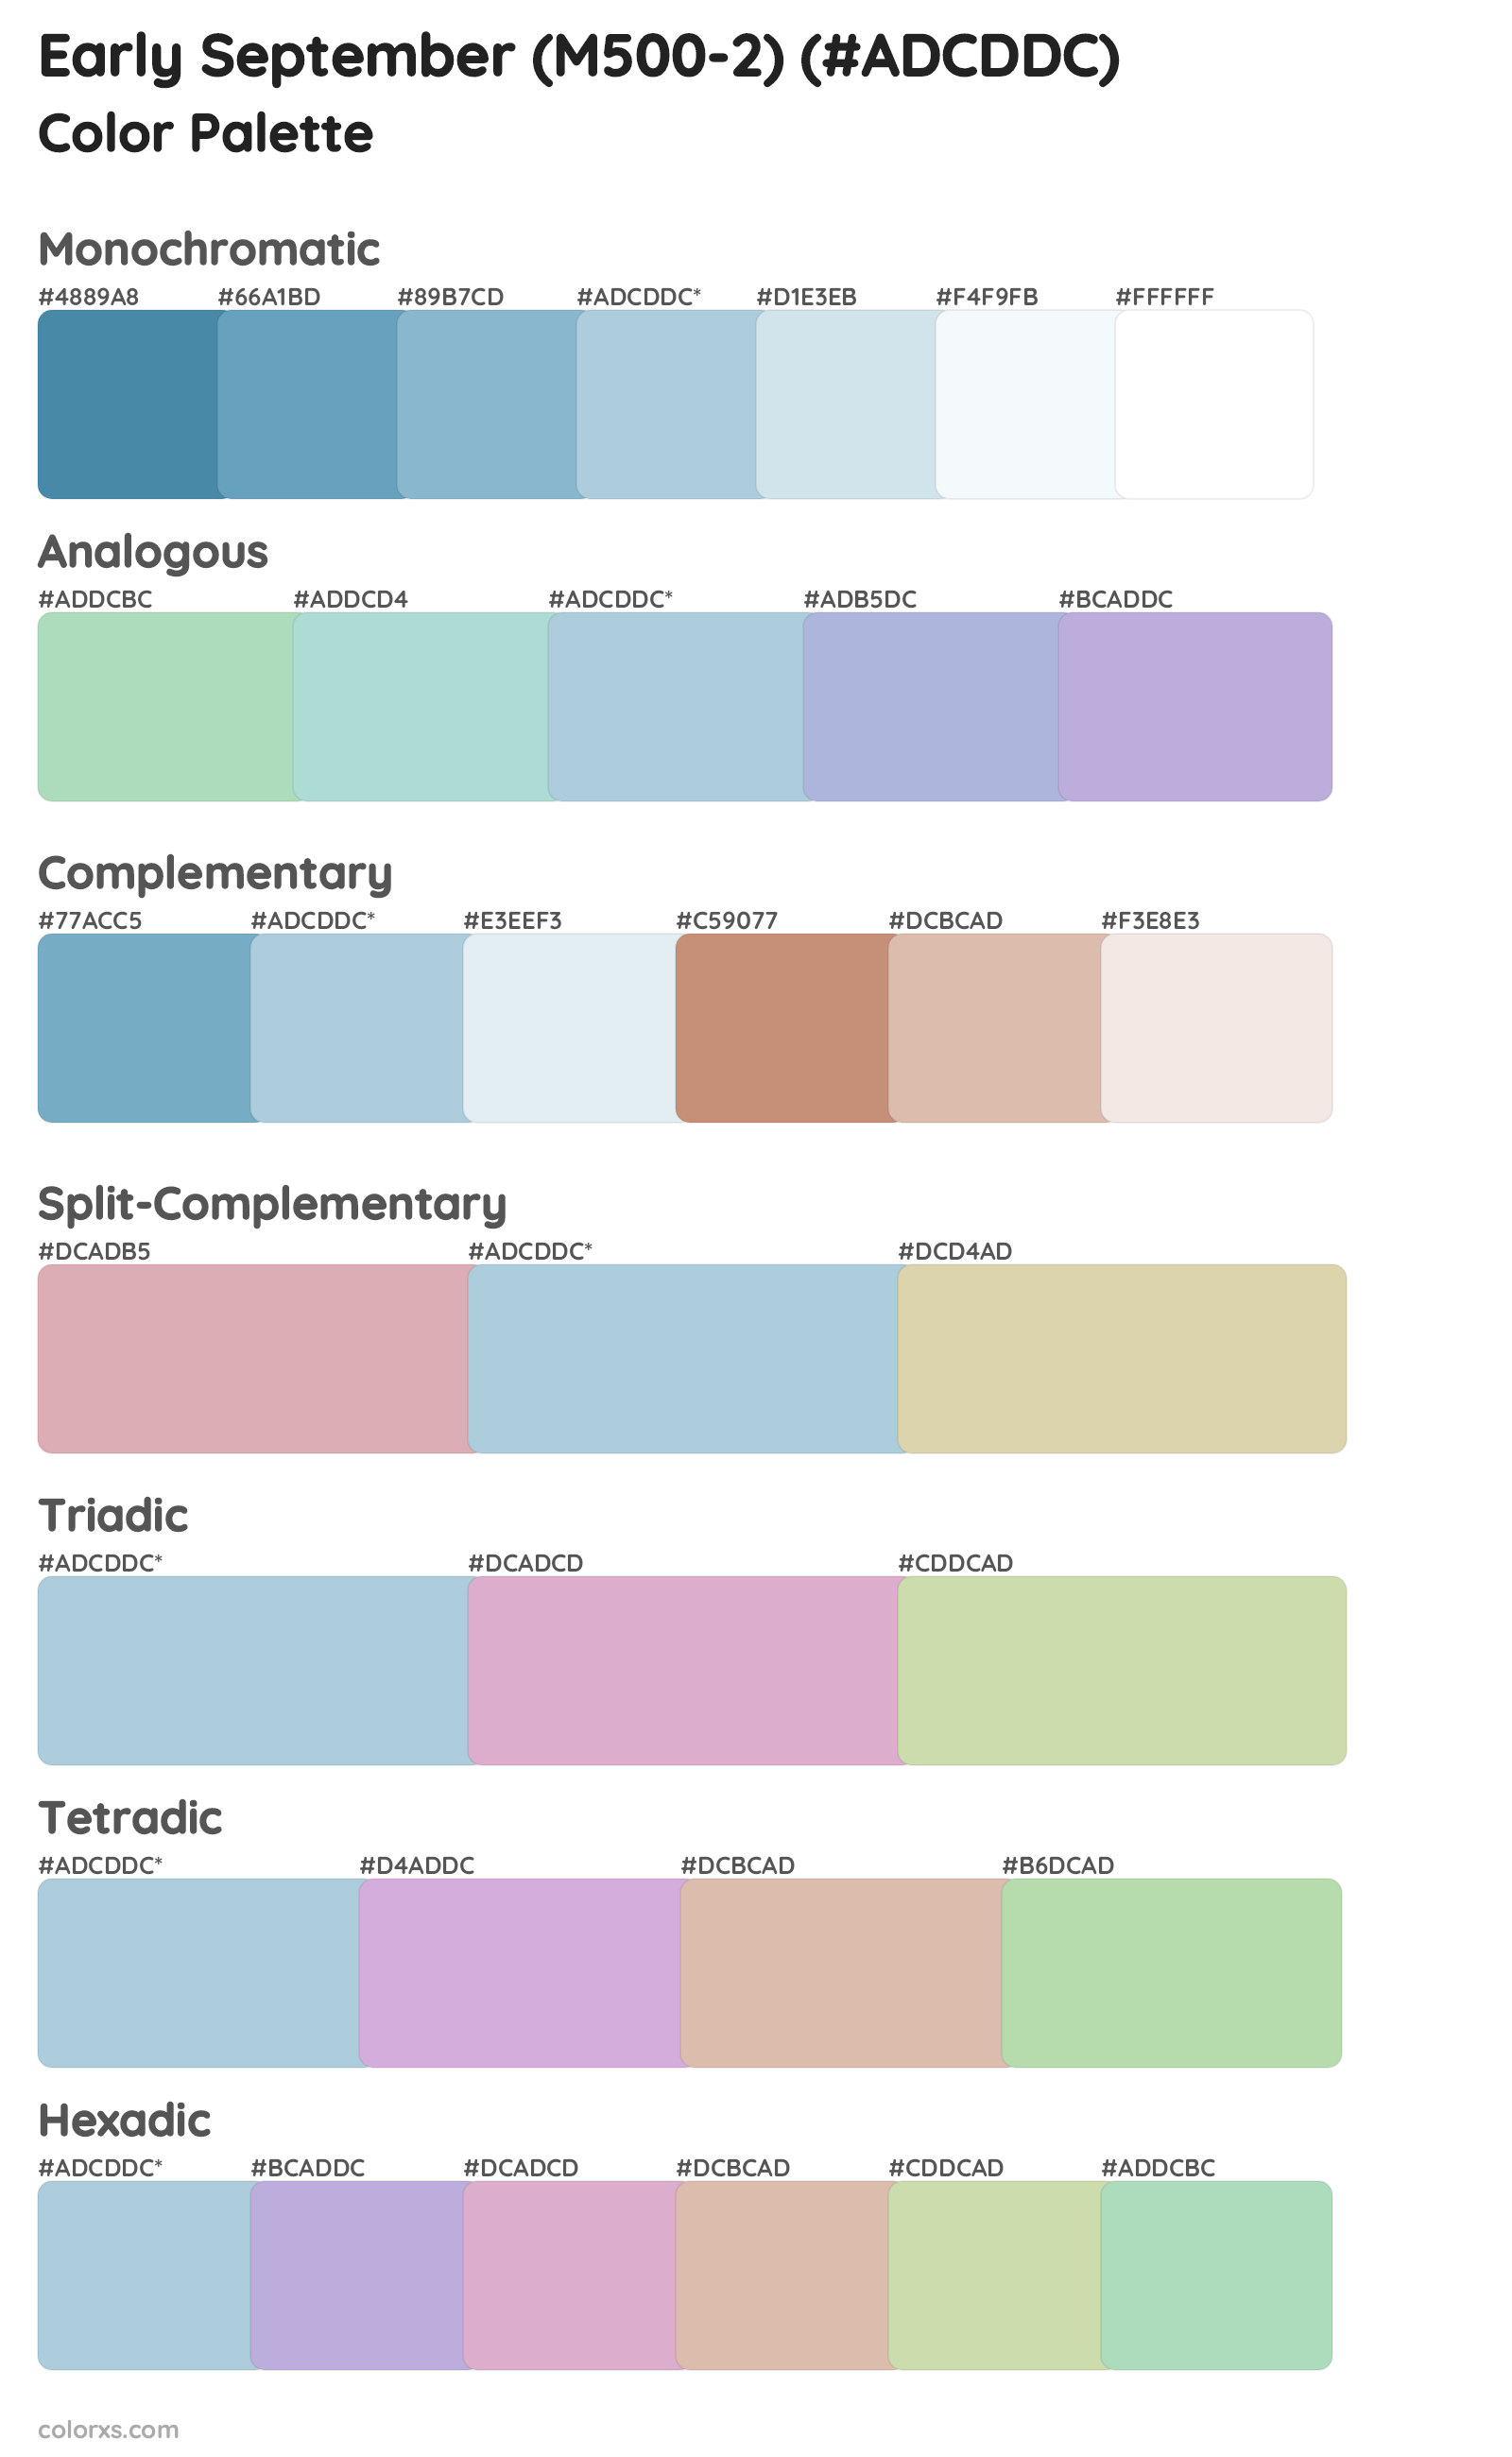 Early September (M500-2) Color Scheme Palettes